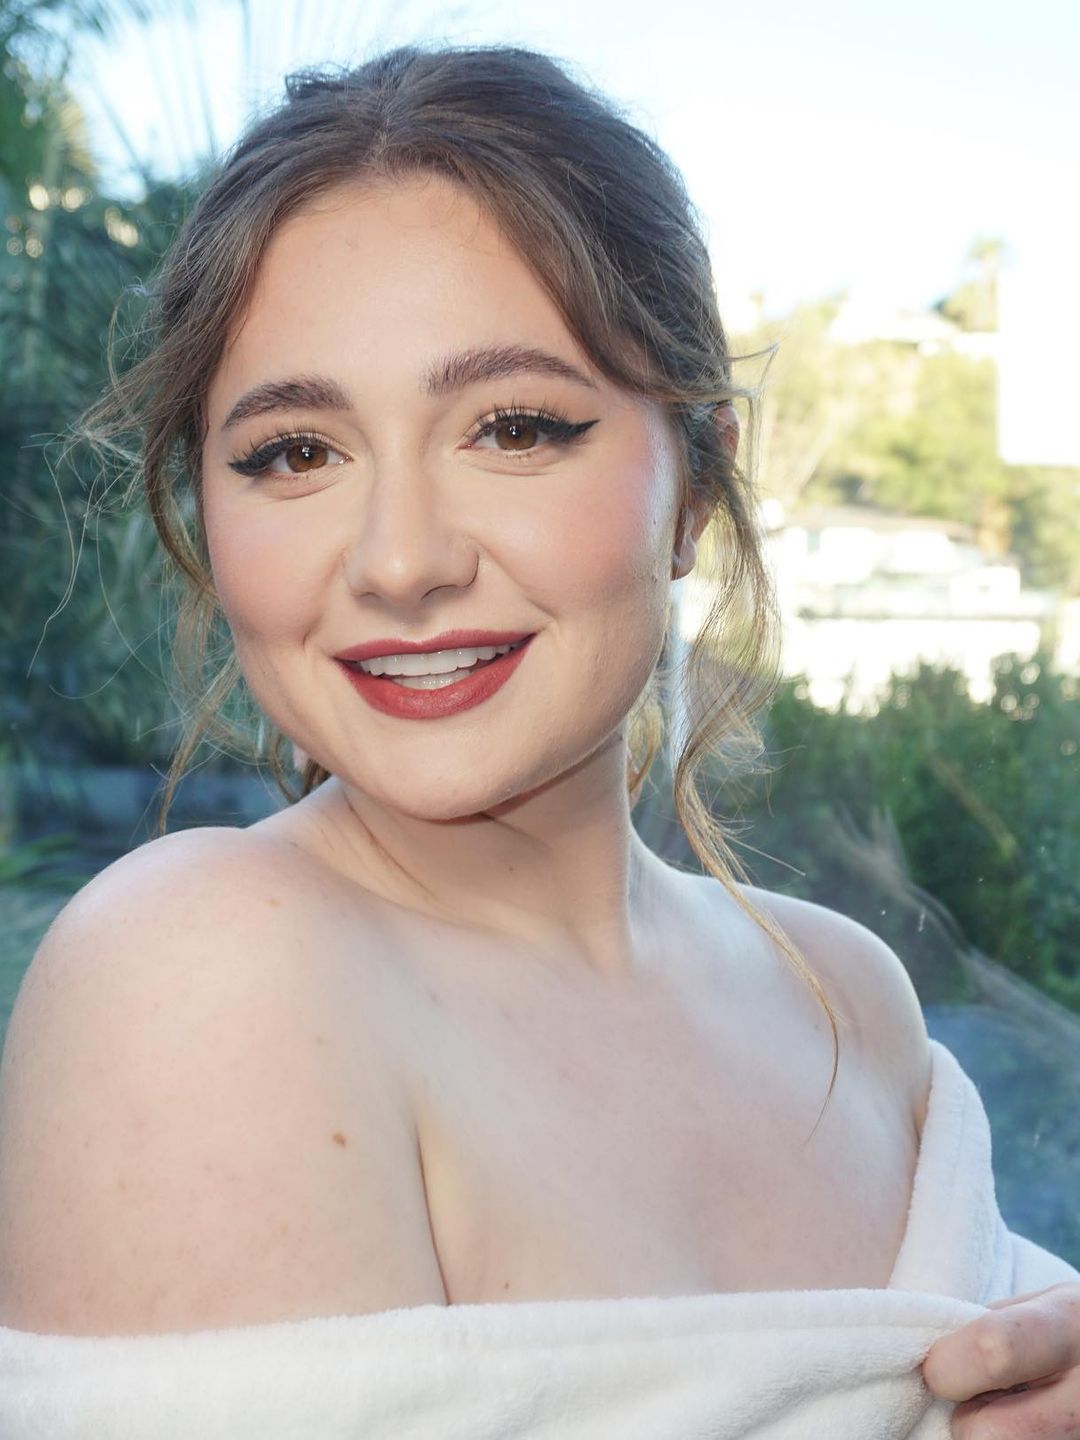 Emma Kenney unphotoshopped pictures